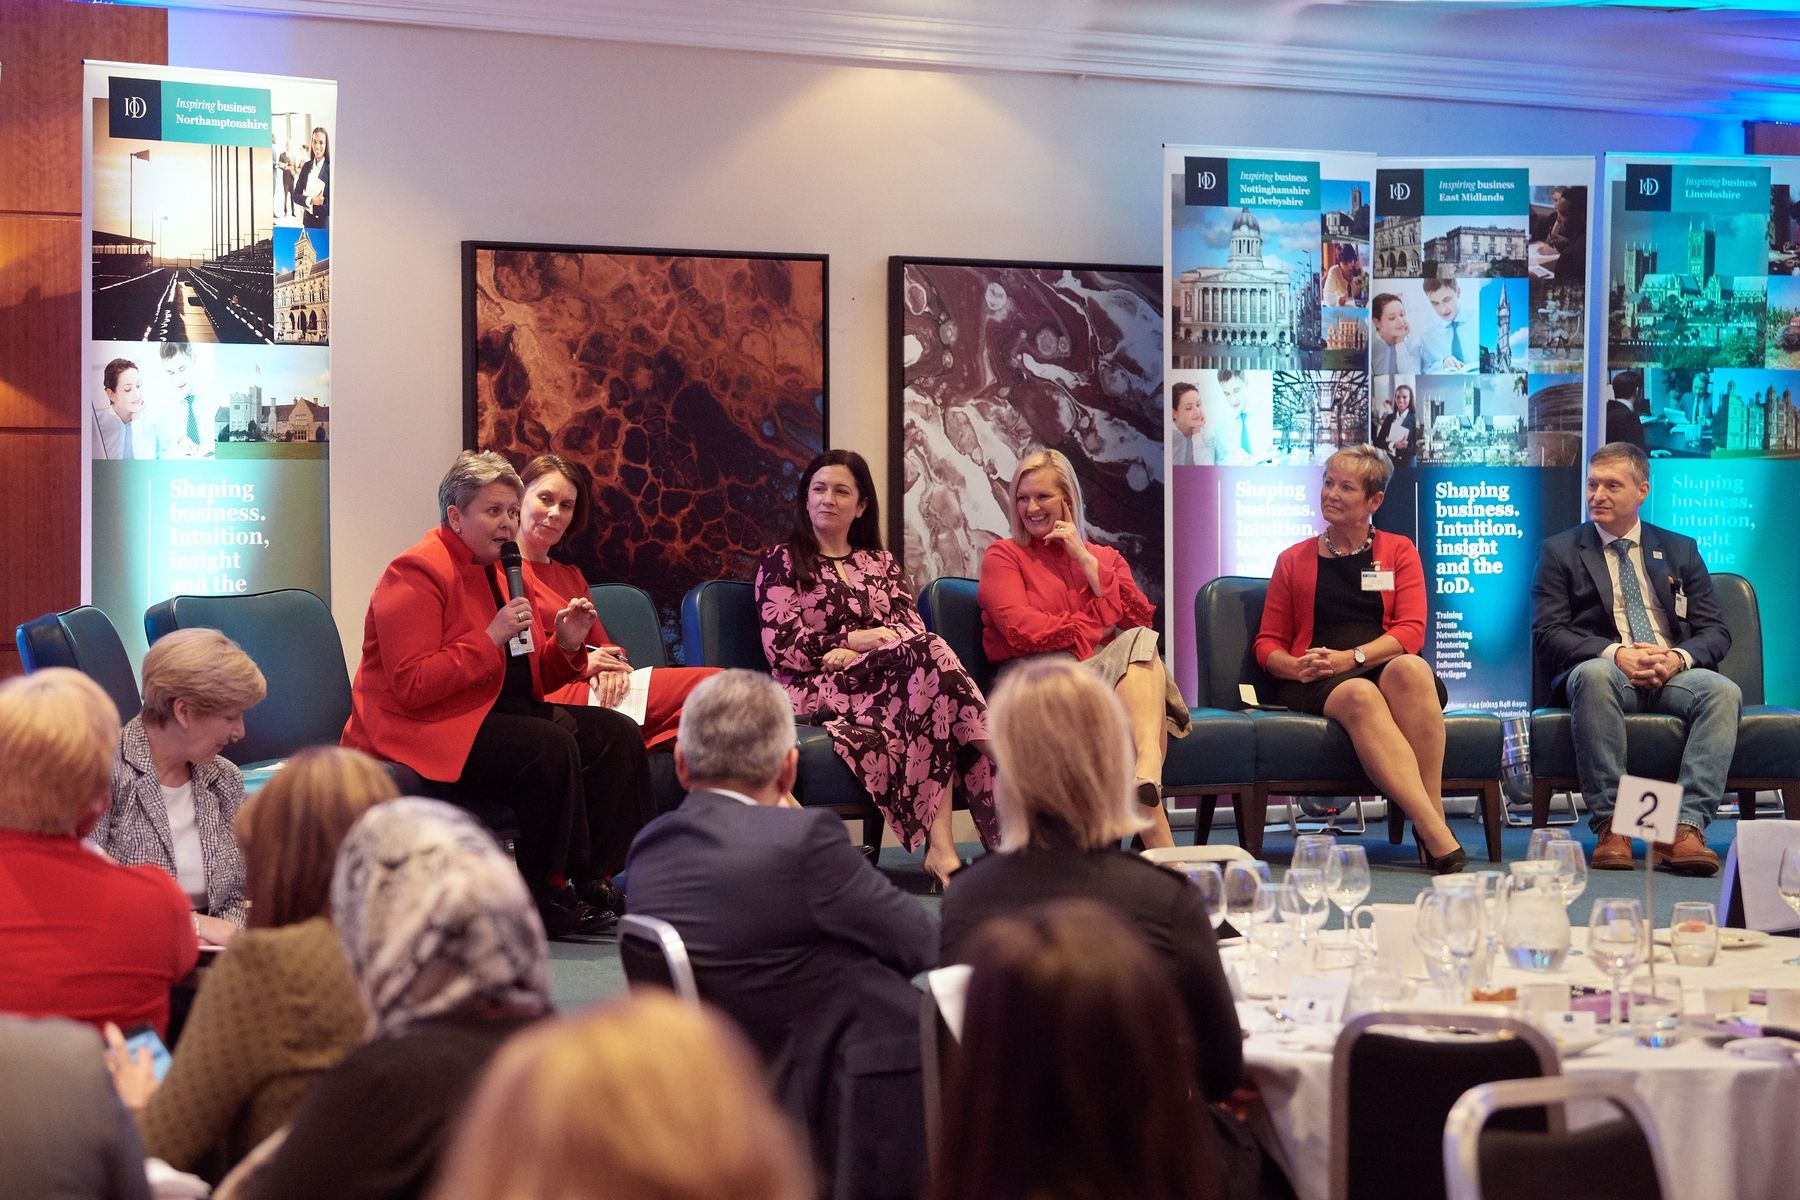 Panellists during the Q&A session at the Women As Leaders Convention in Nottingham